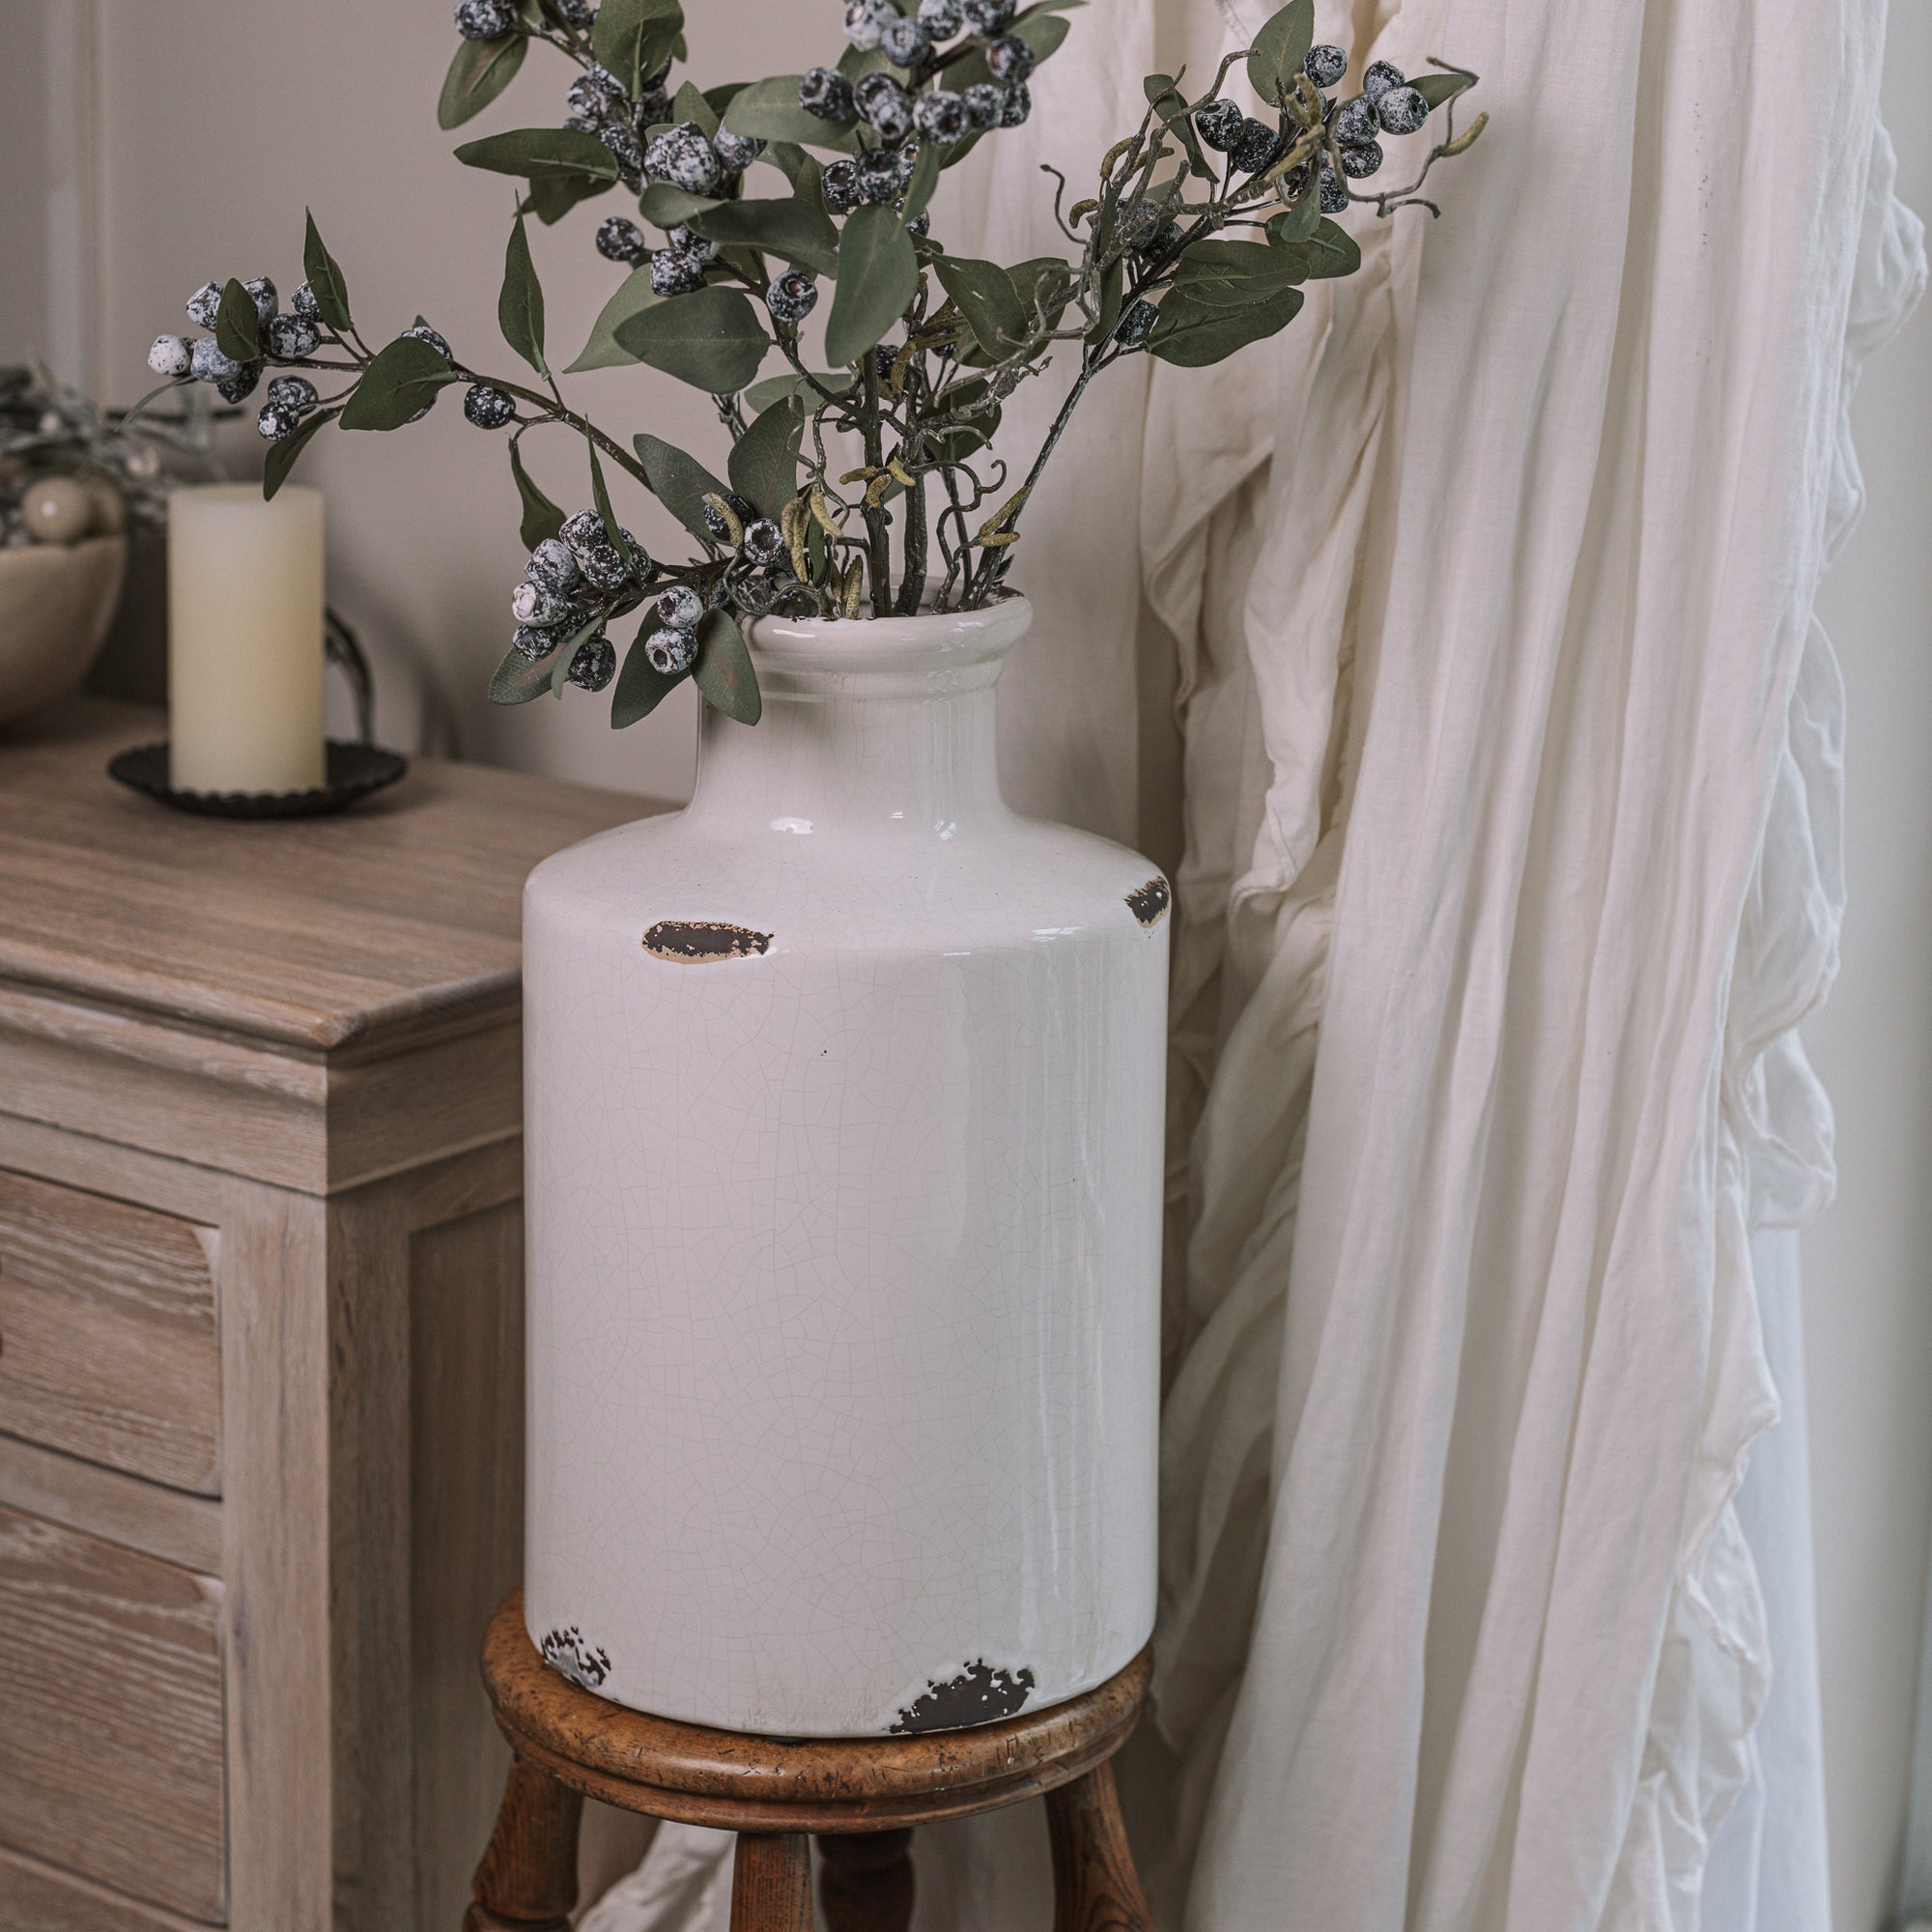 White distressed bottle vase with berry spray branches on a wooden stool.